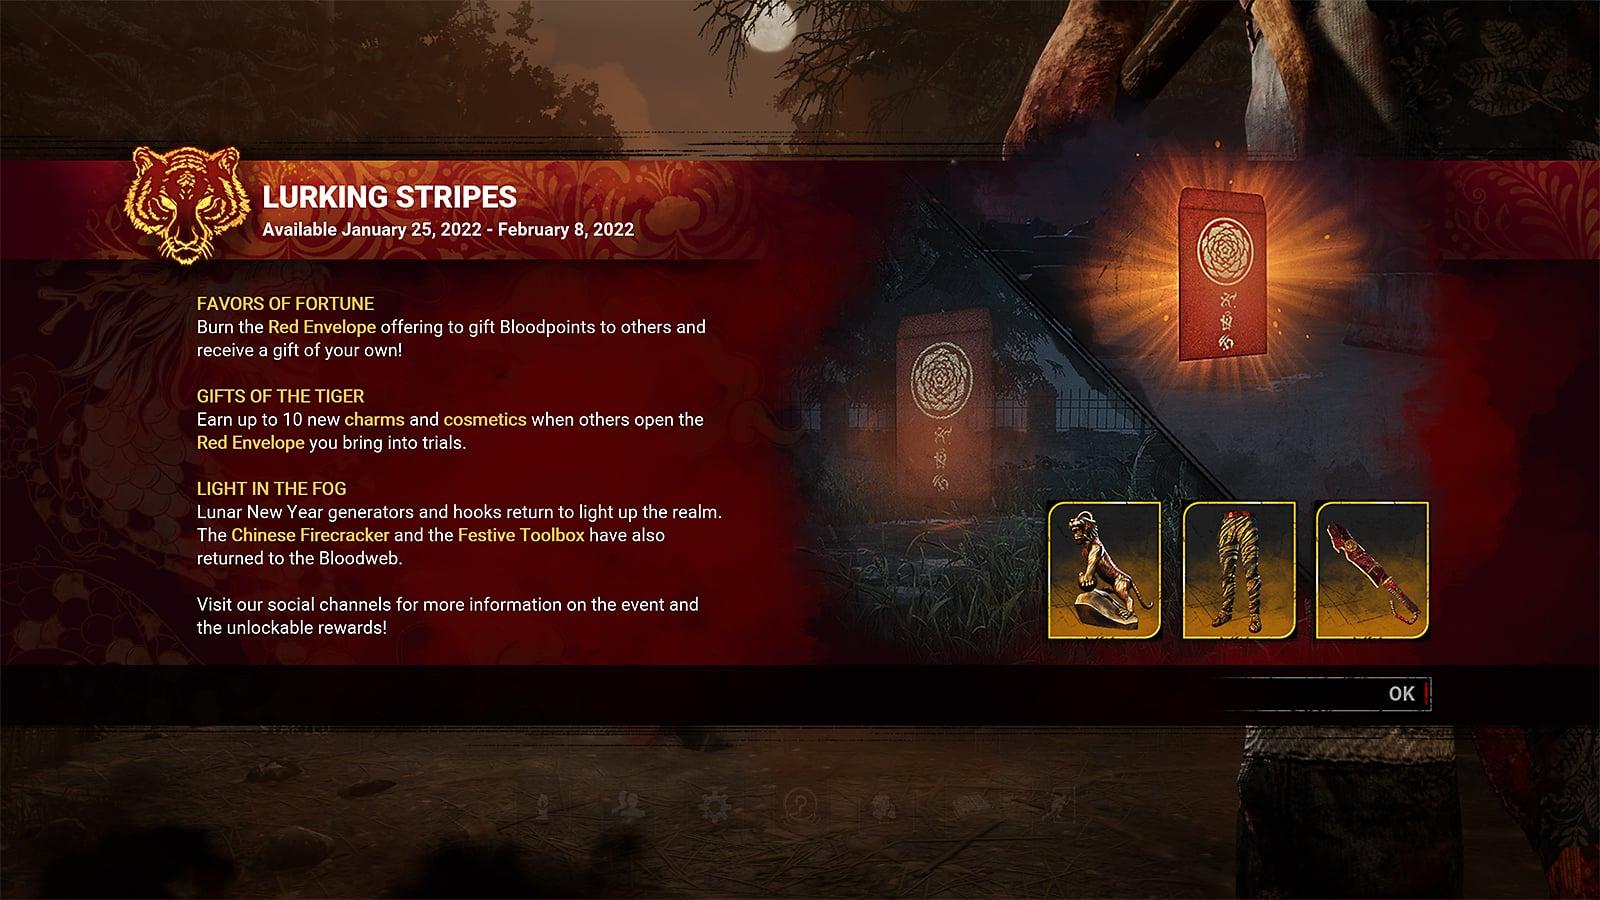 An image that shows information about the Lurking Stripes Lunar New Year event in Dead by Daylight